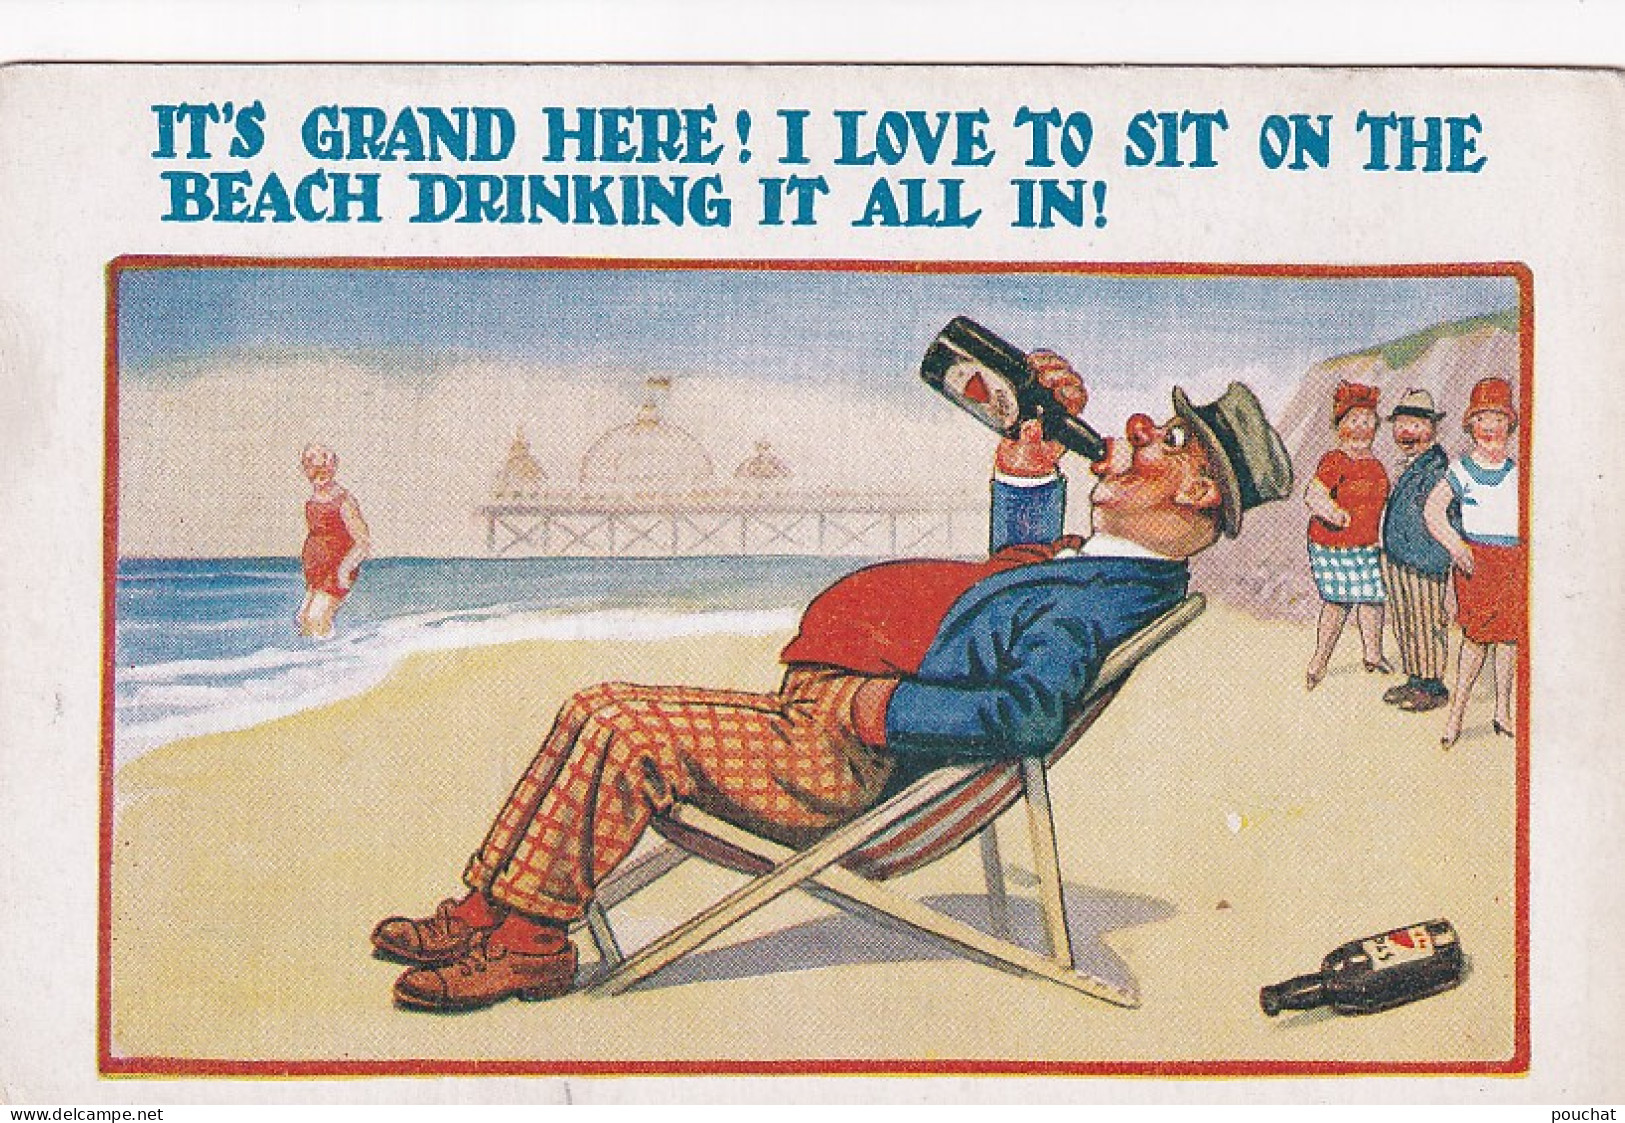 UR Nw45- IT'S GRAND HERE ! I LOVE TO SIT ON THE BEACH DRINKING IT ALL IN - HOMME BUVANT SUR LA PLAGE - ILLUSTRATEUR - Humour